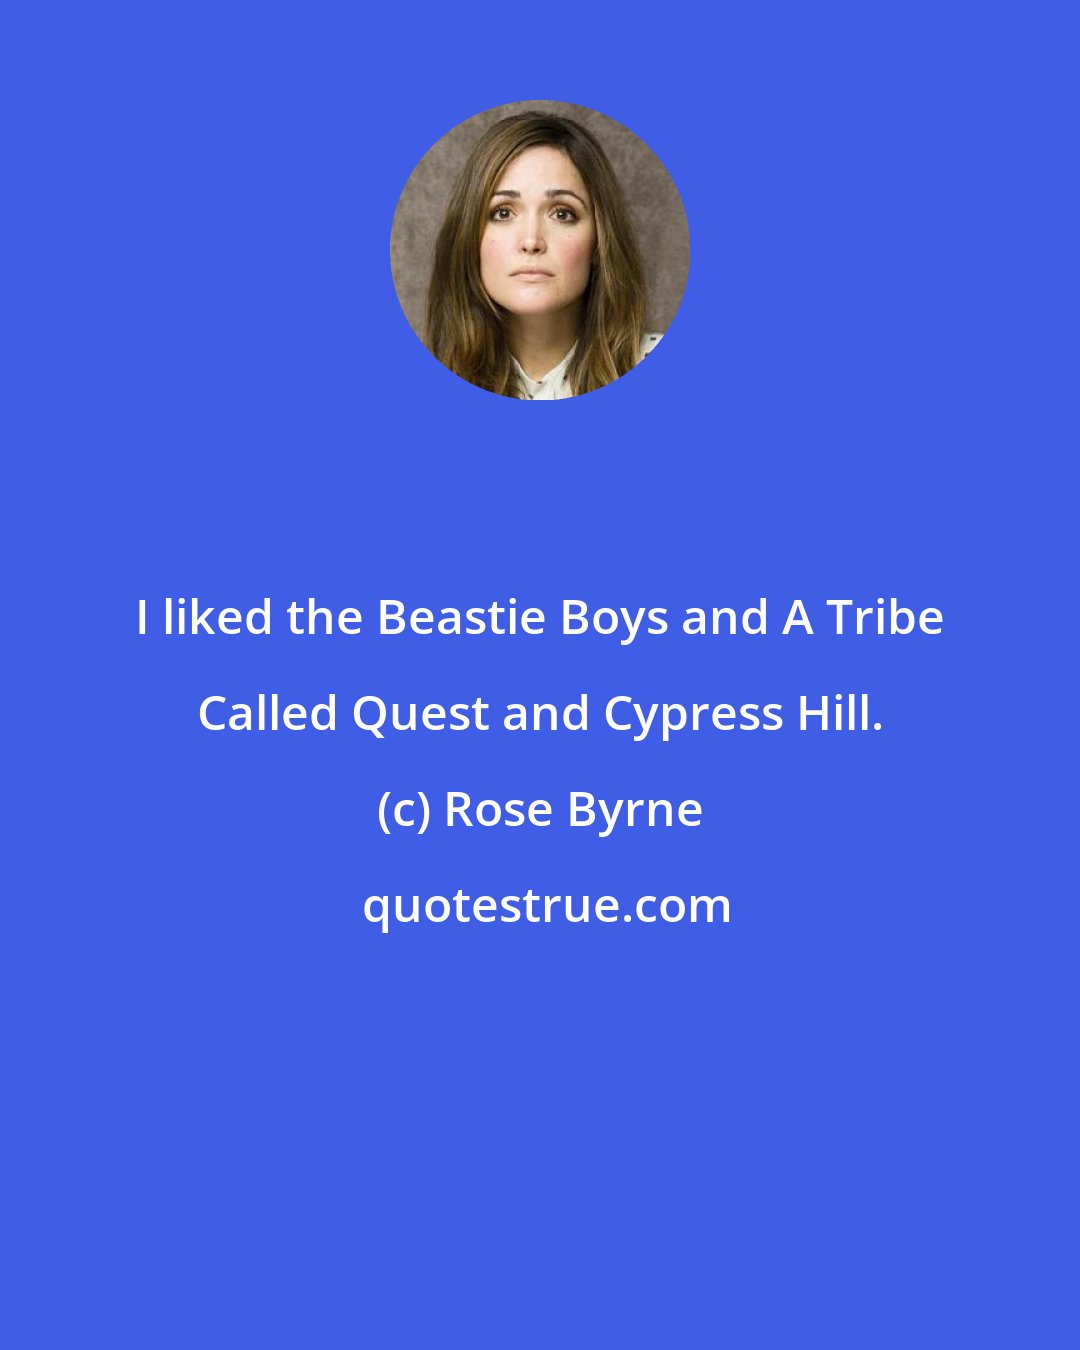 Rose Byrne: I liked the Beastie Boys and A Tribe Called Quest and Cypress Hill.